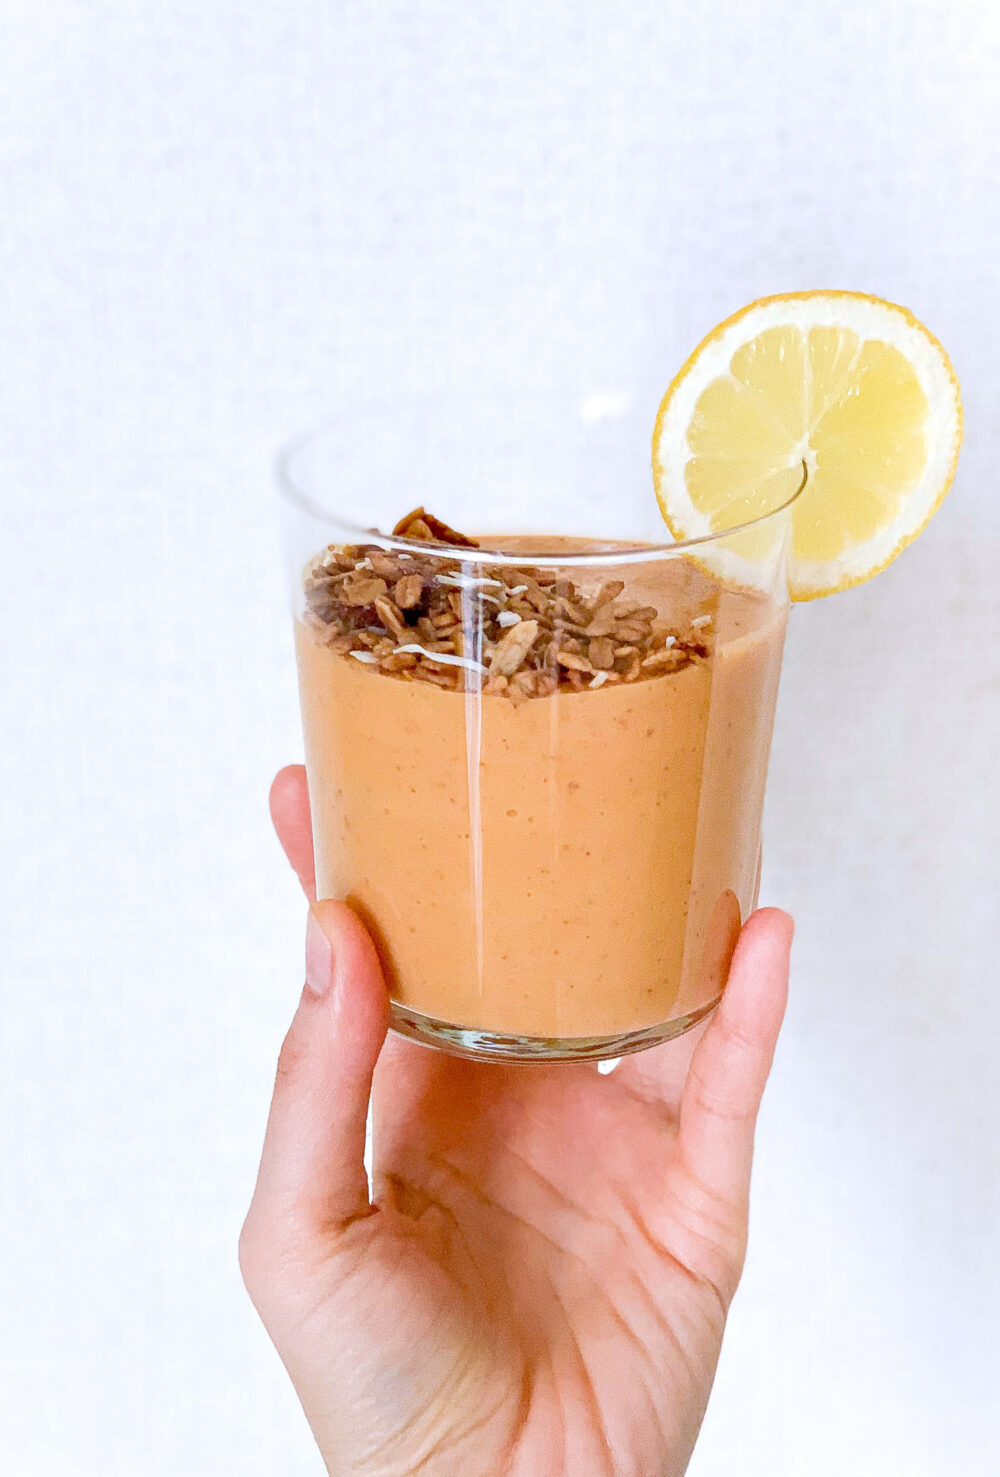 Carrot and sweet potato hot smoothie